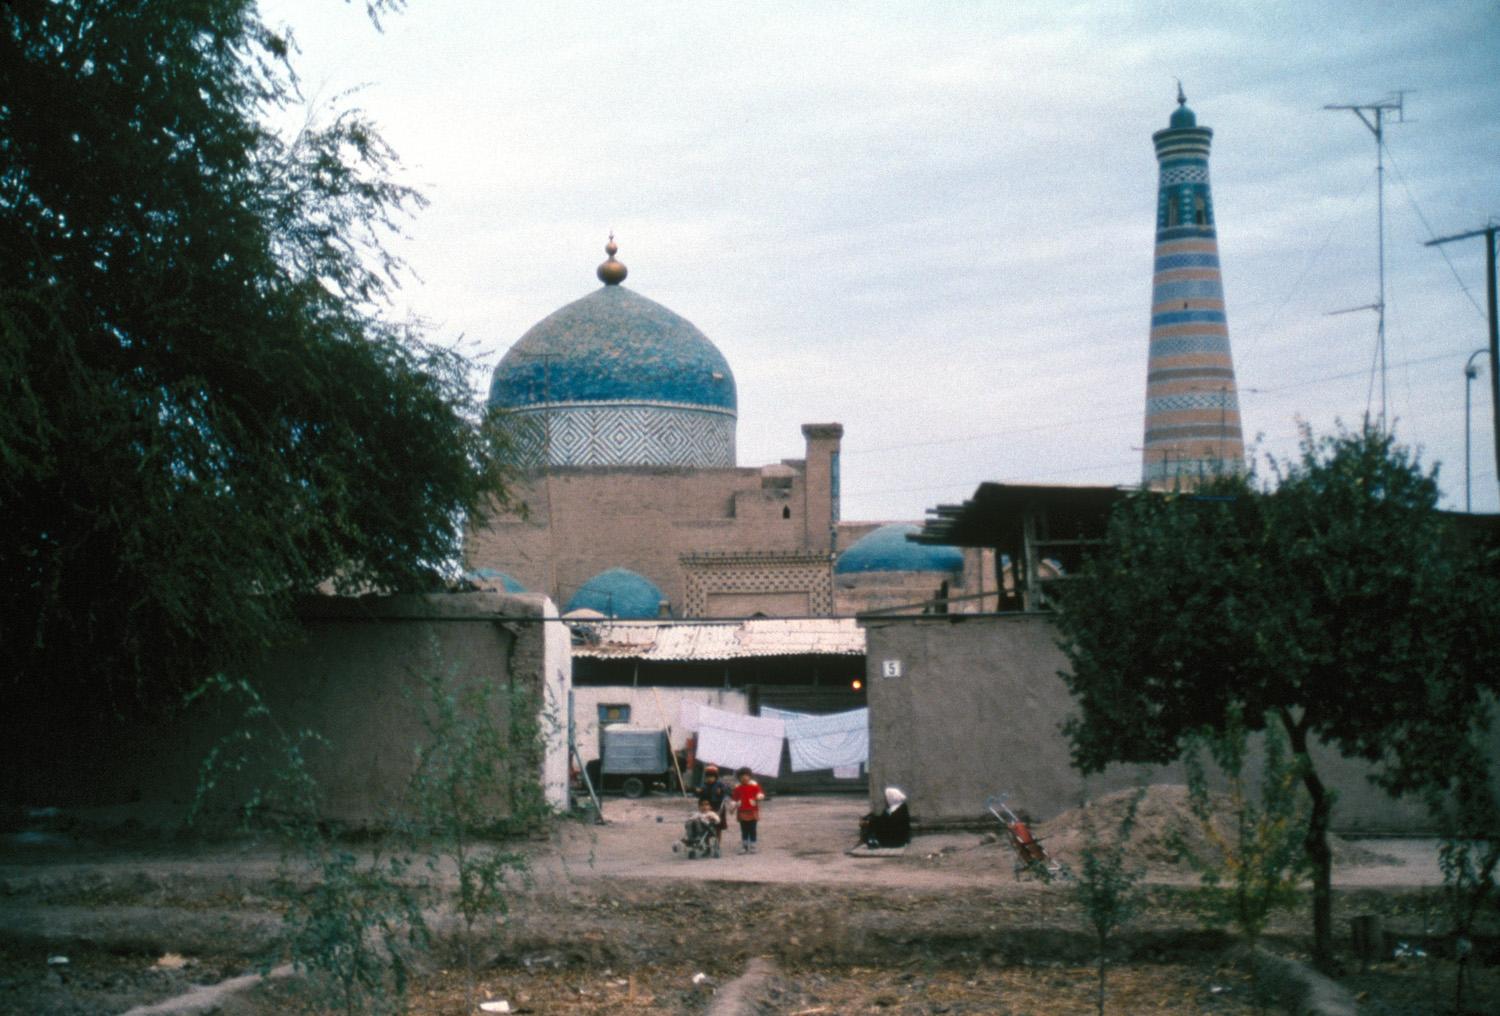 Exterior view of the khanagah, with the minaret of the Islam Hodja Madrasa in the background